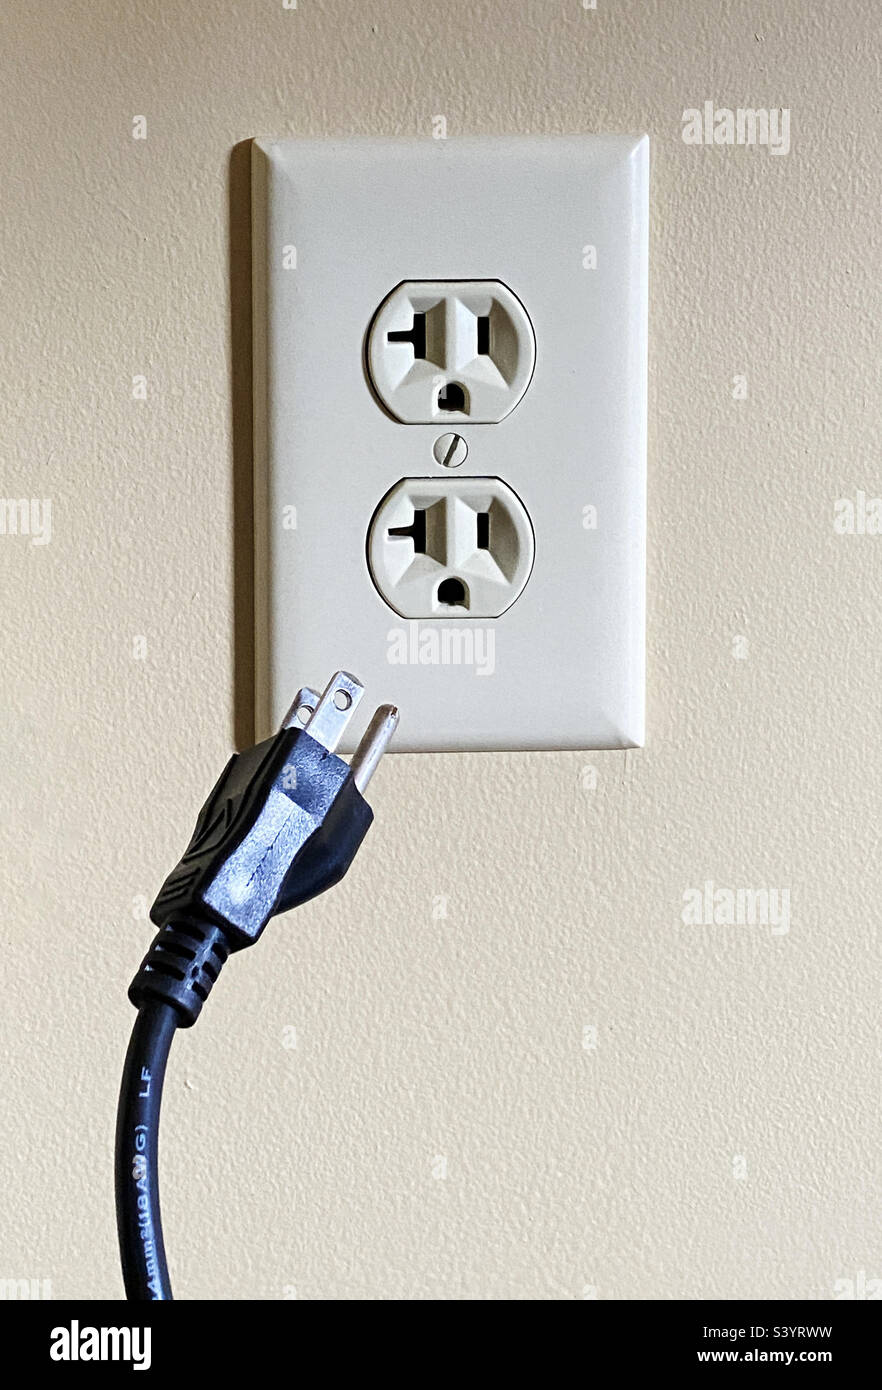 Electrical cord unplugged from electrical outlet in the United States. Stock Photo